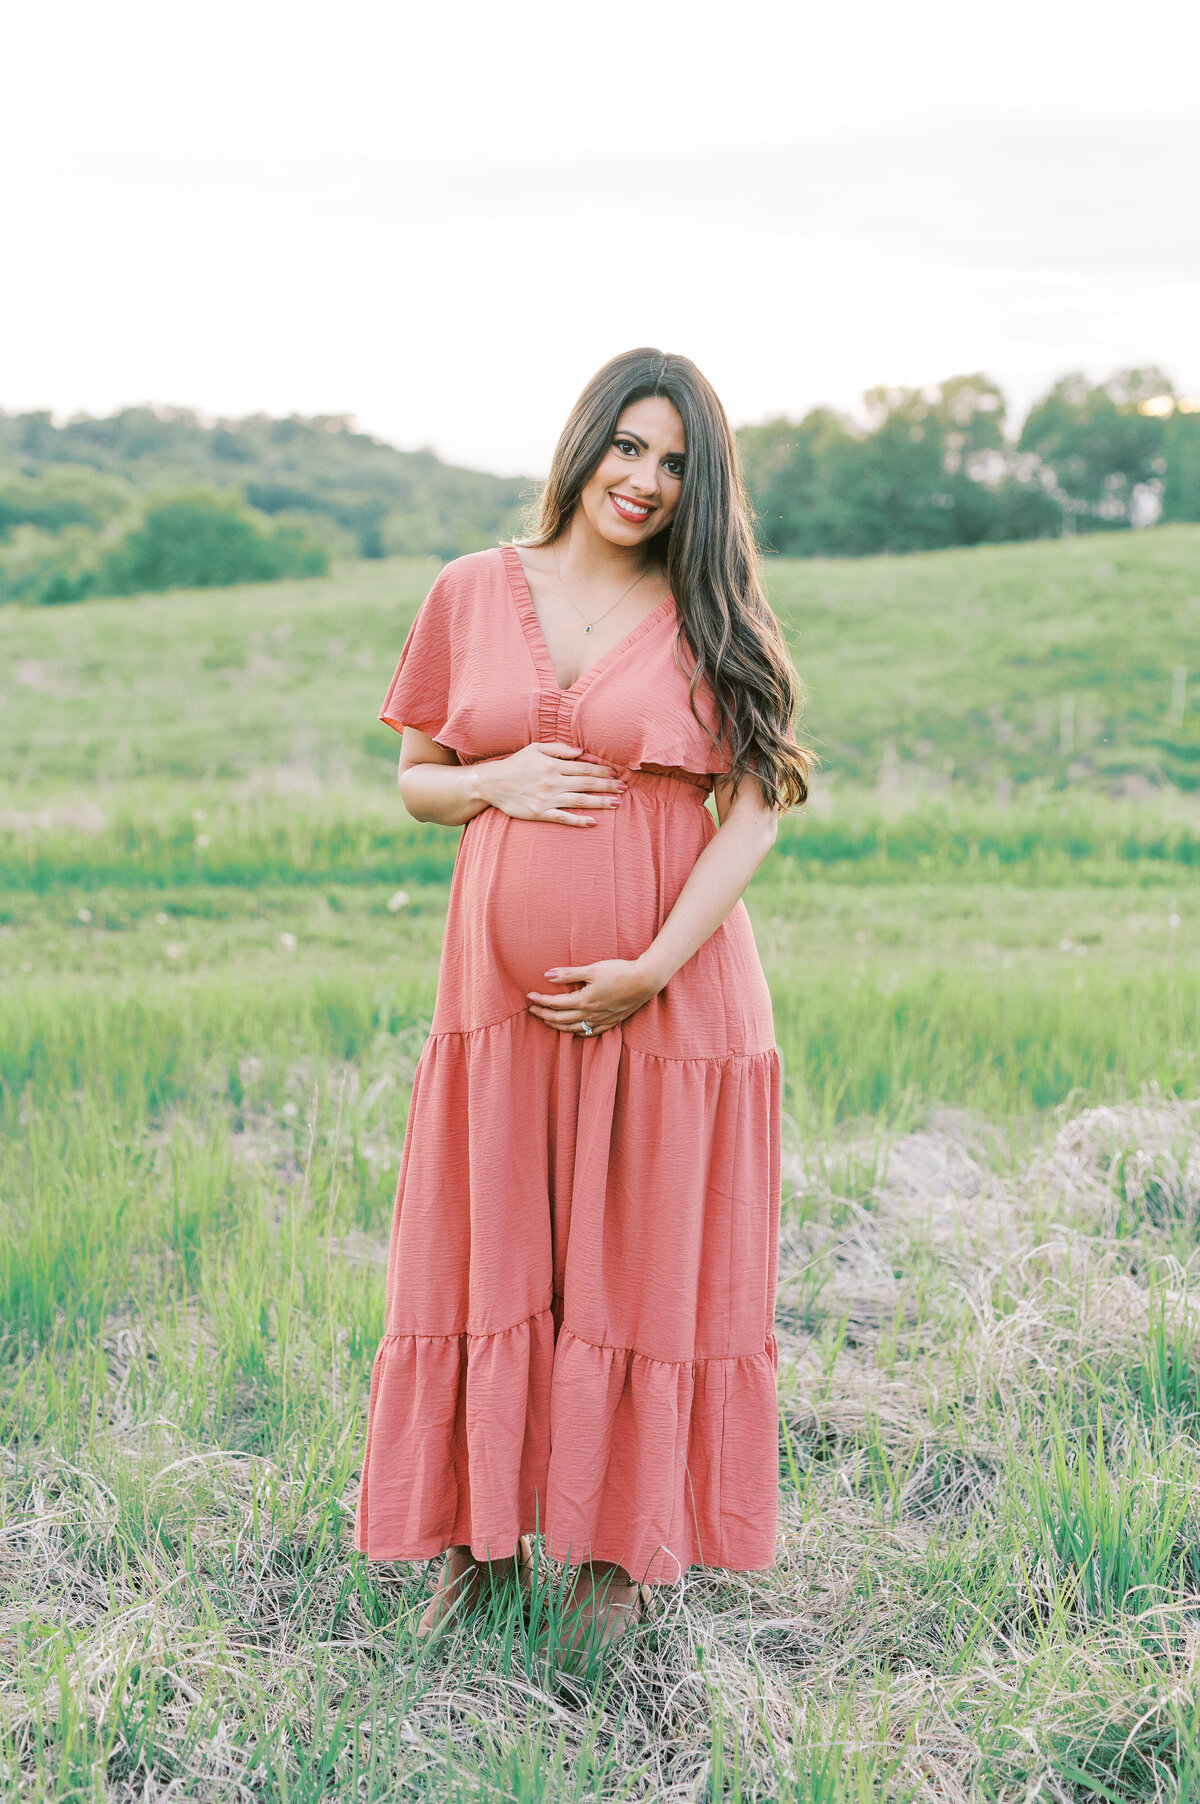 Mom in field holding stomach at maternity session